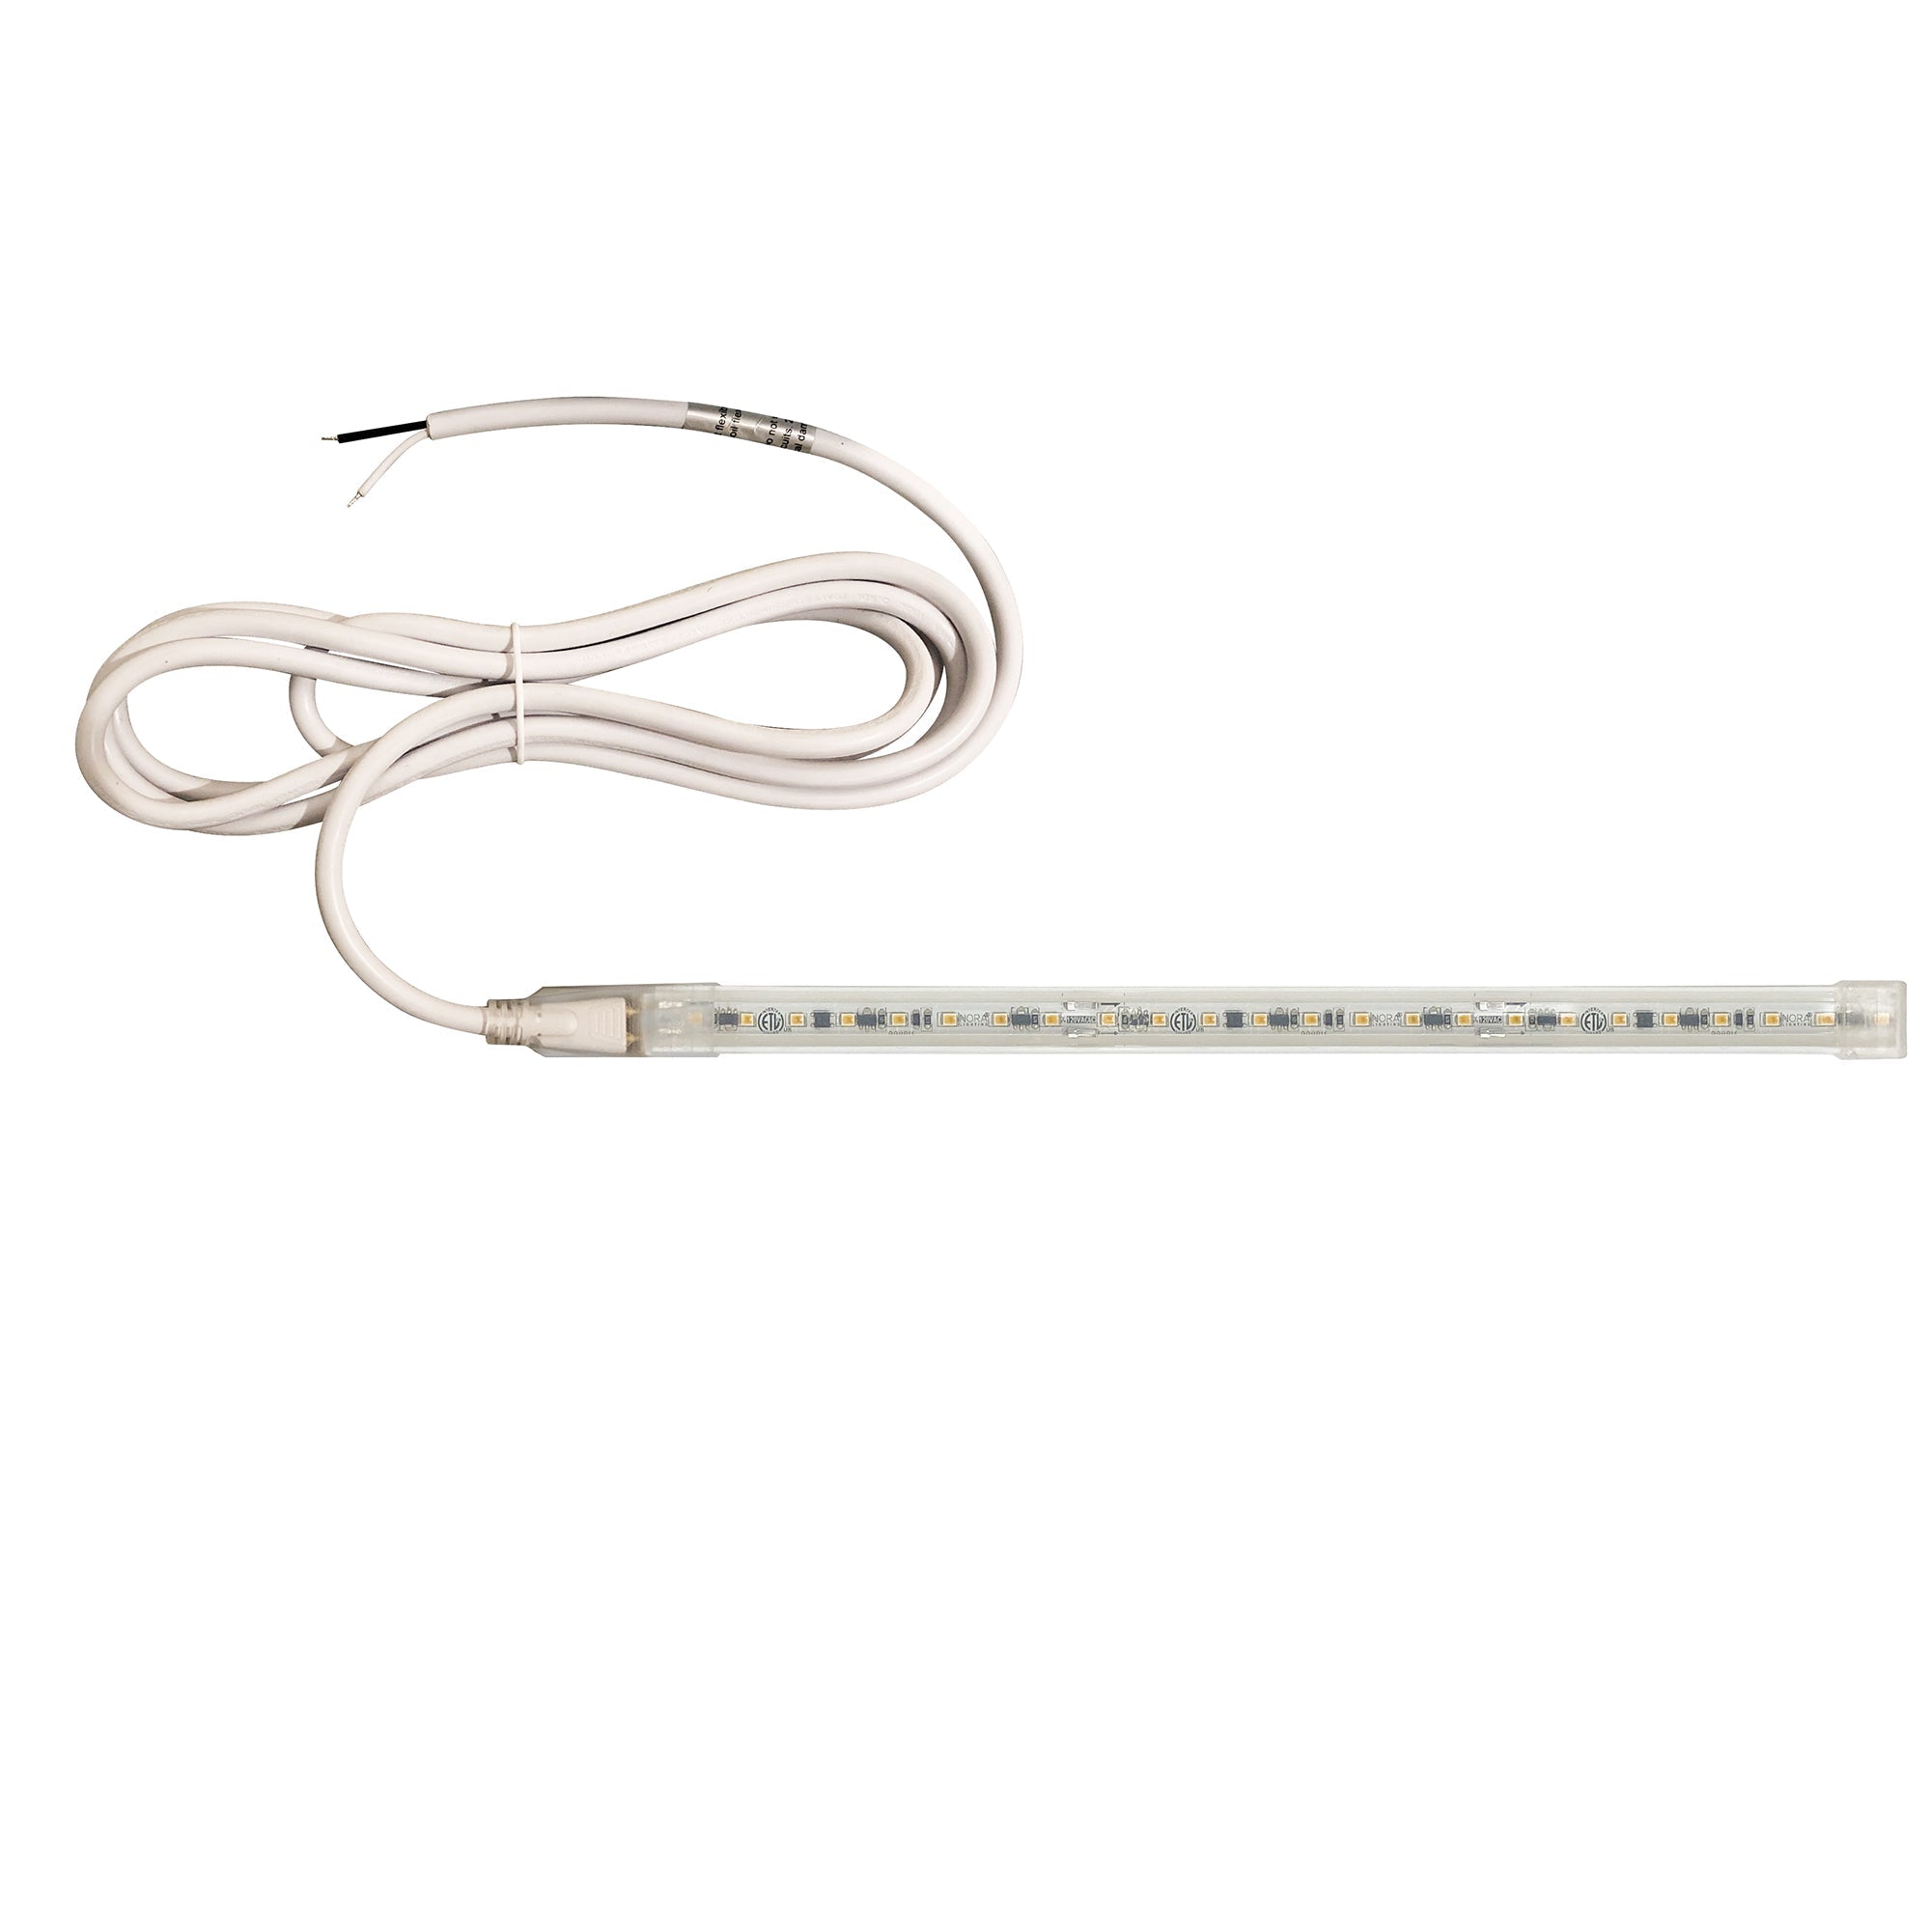 Nora Lighting NUTP13-W60-12-940/HW - Accent / Undercabinet - Custom Cut 60-ft 120V Continuous LED Tape Light, 330lm / 3.6W per foot, 4000K, w/ Mounting Clips and 8' Hardwired Power Cord